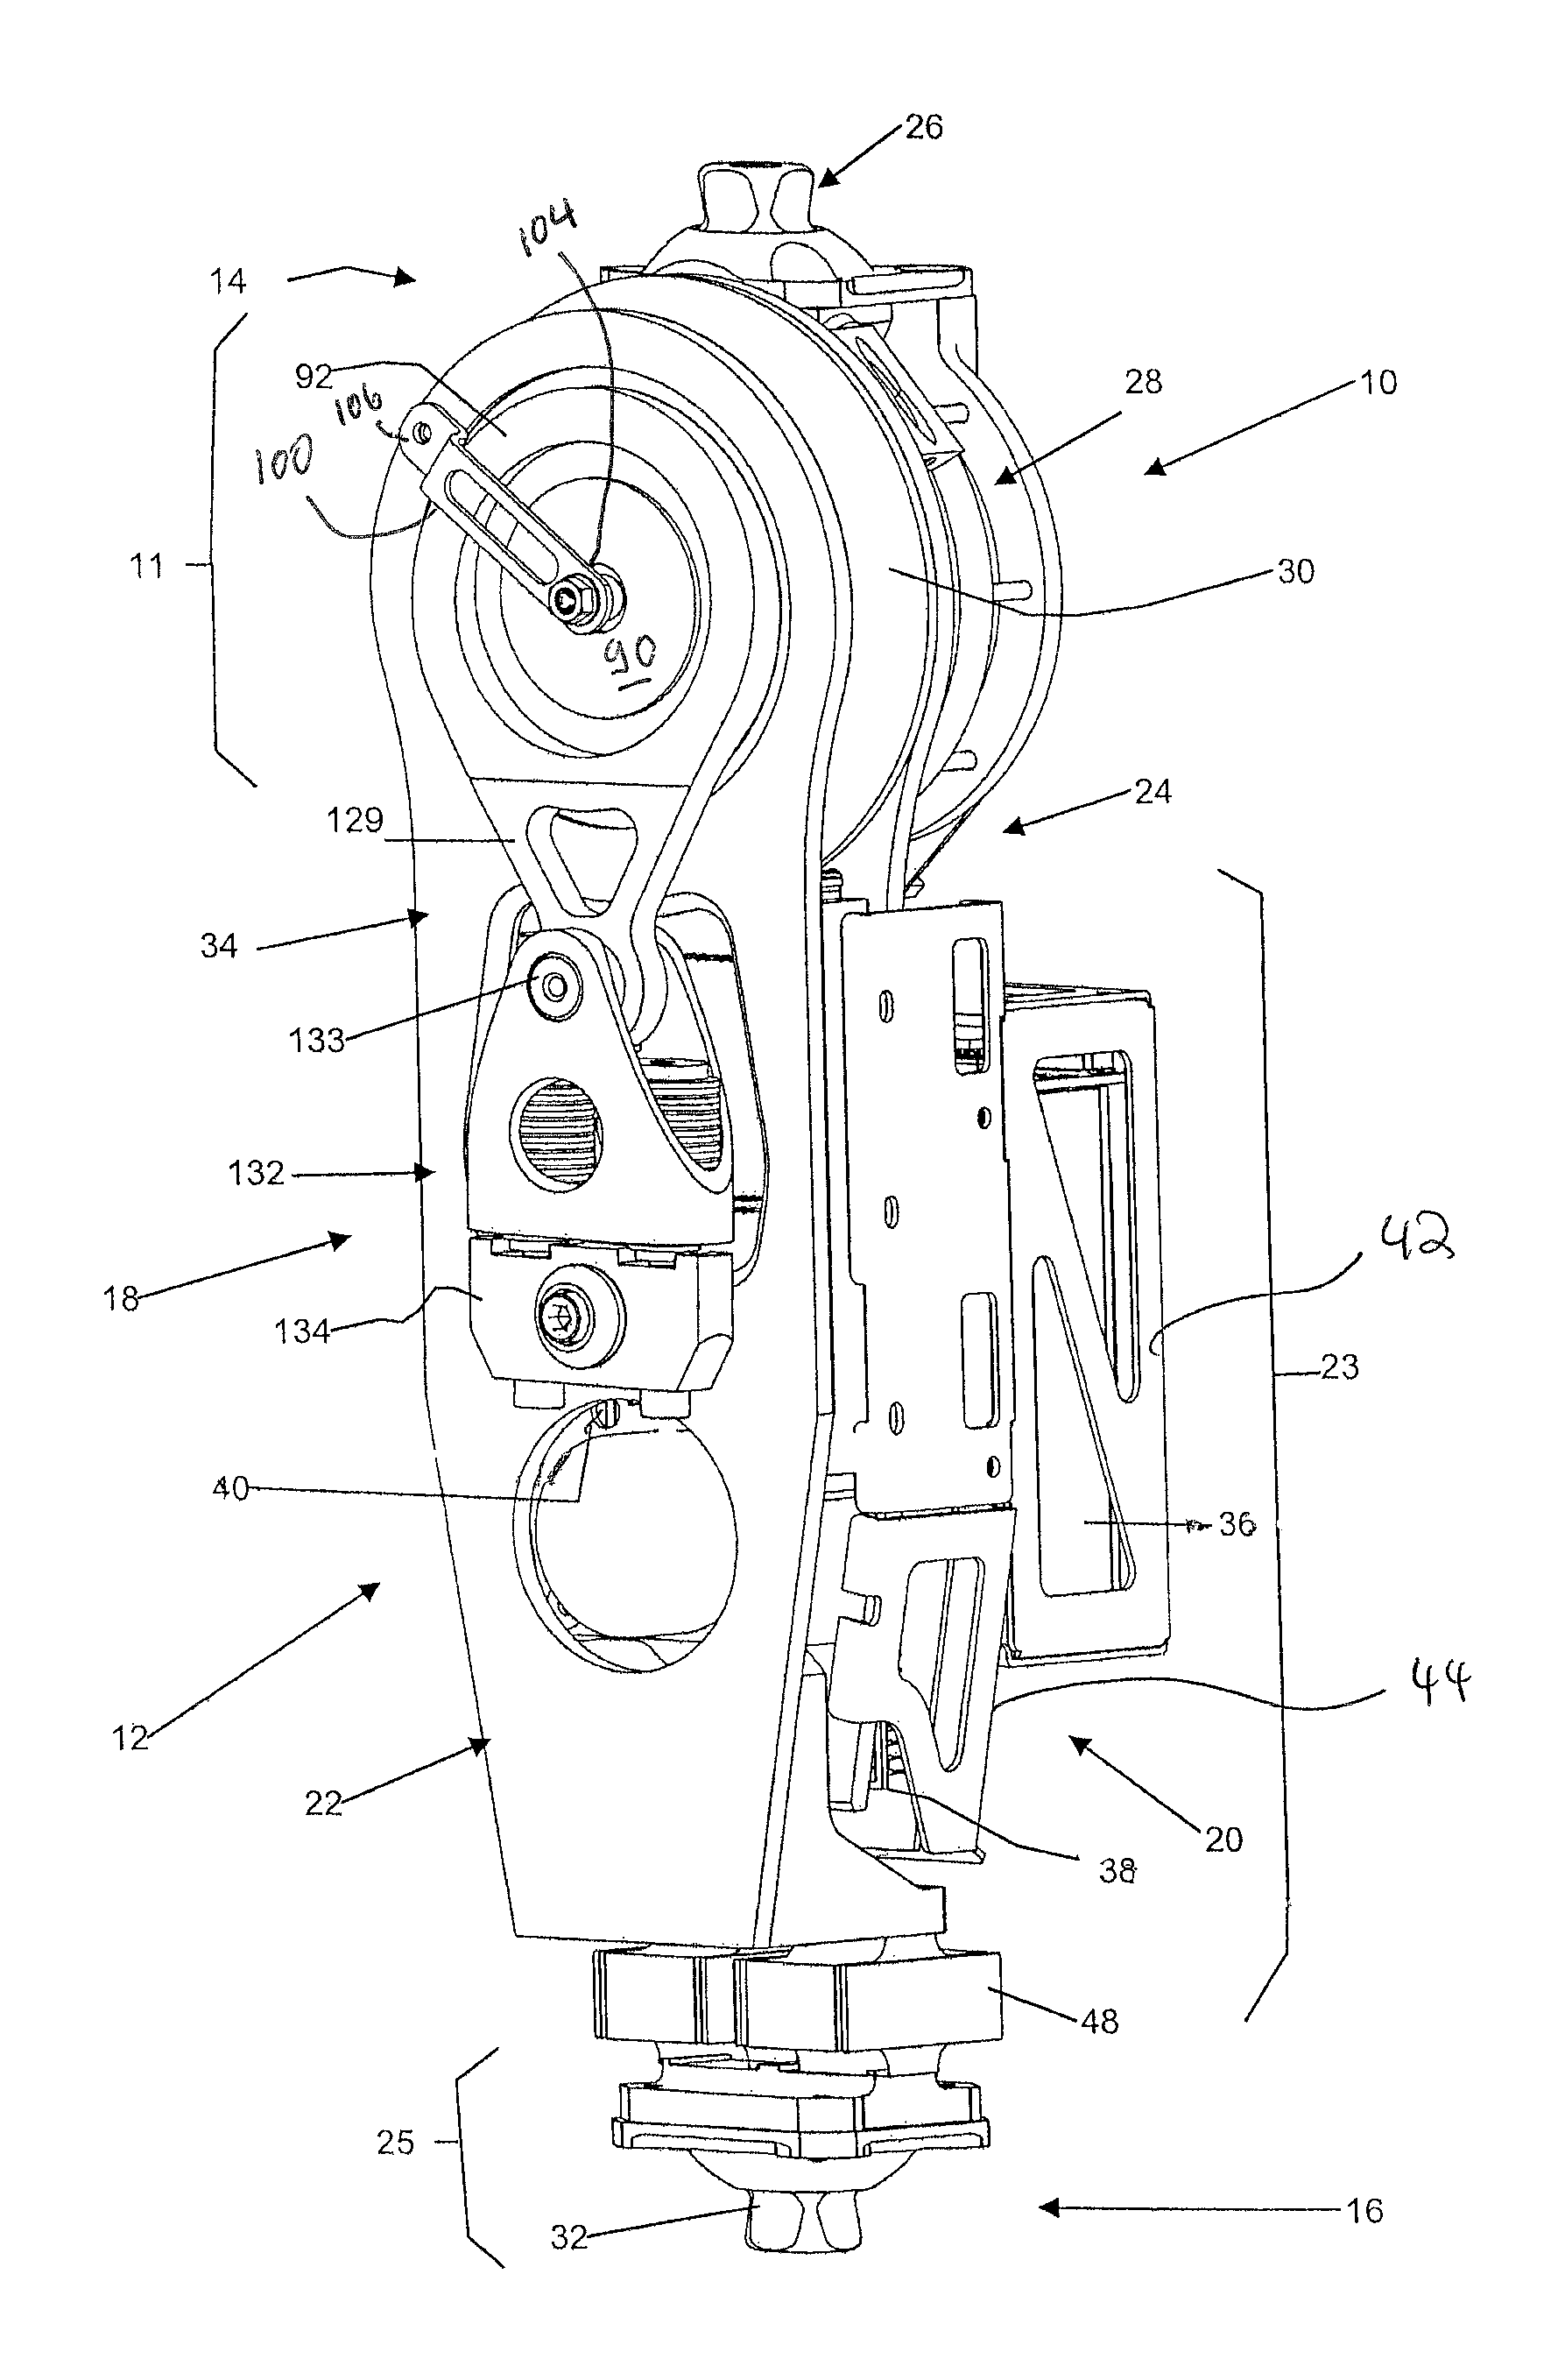 Joint actuation mechanism for a prosthetic and/or orthotic device having a compliant transmission